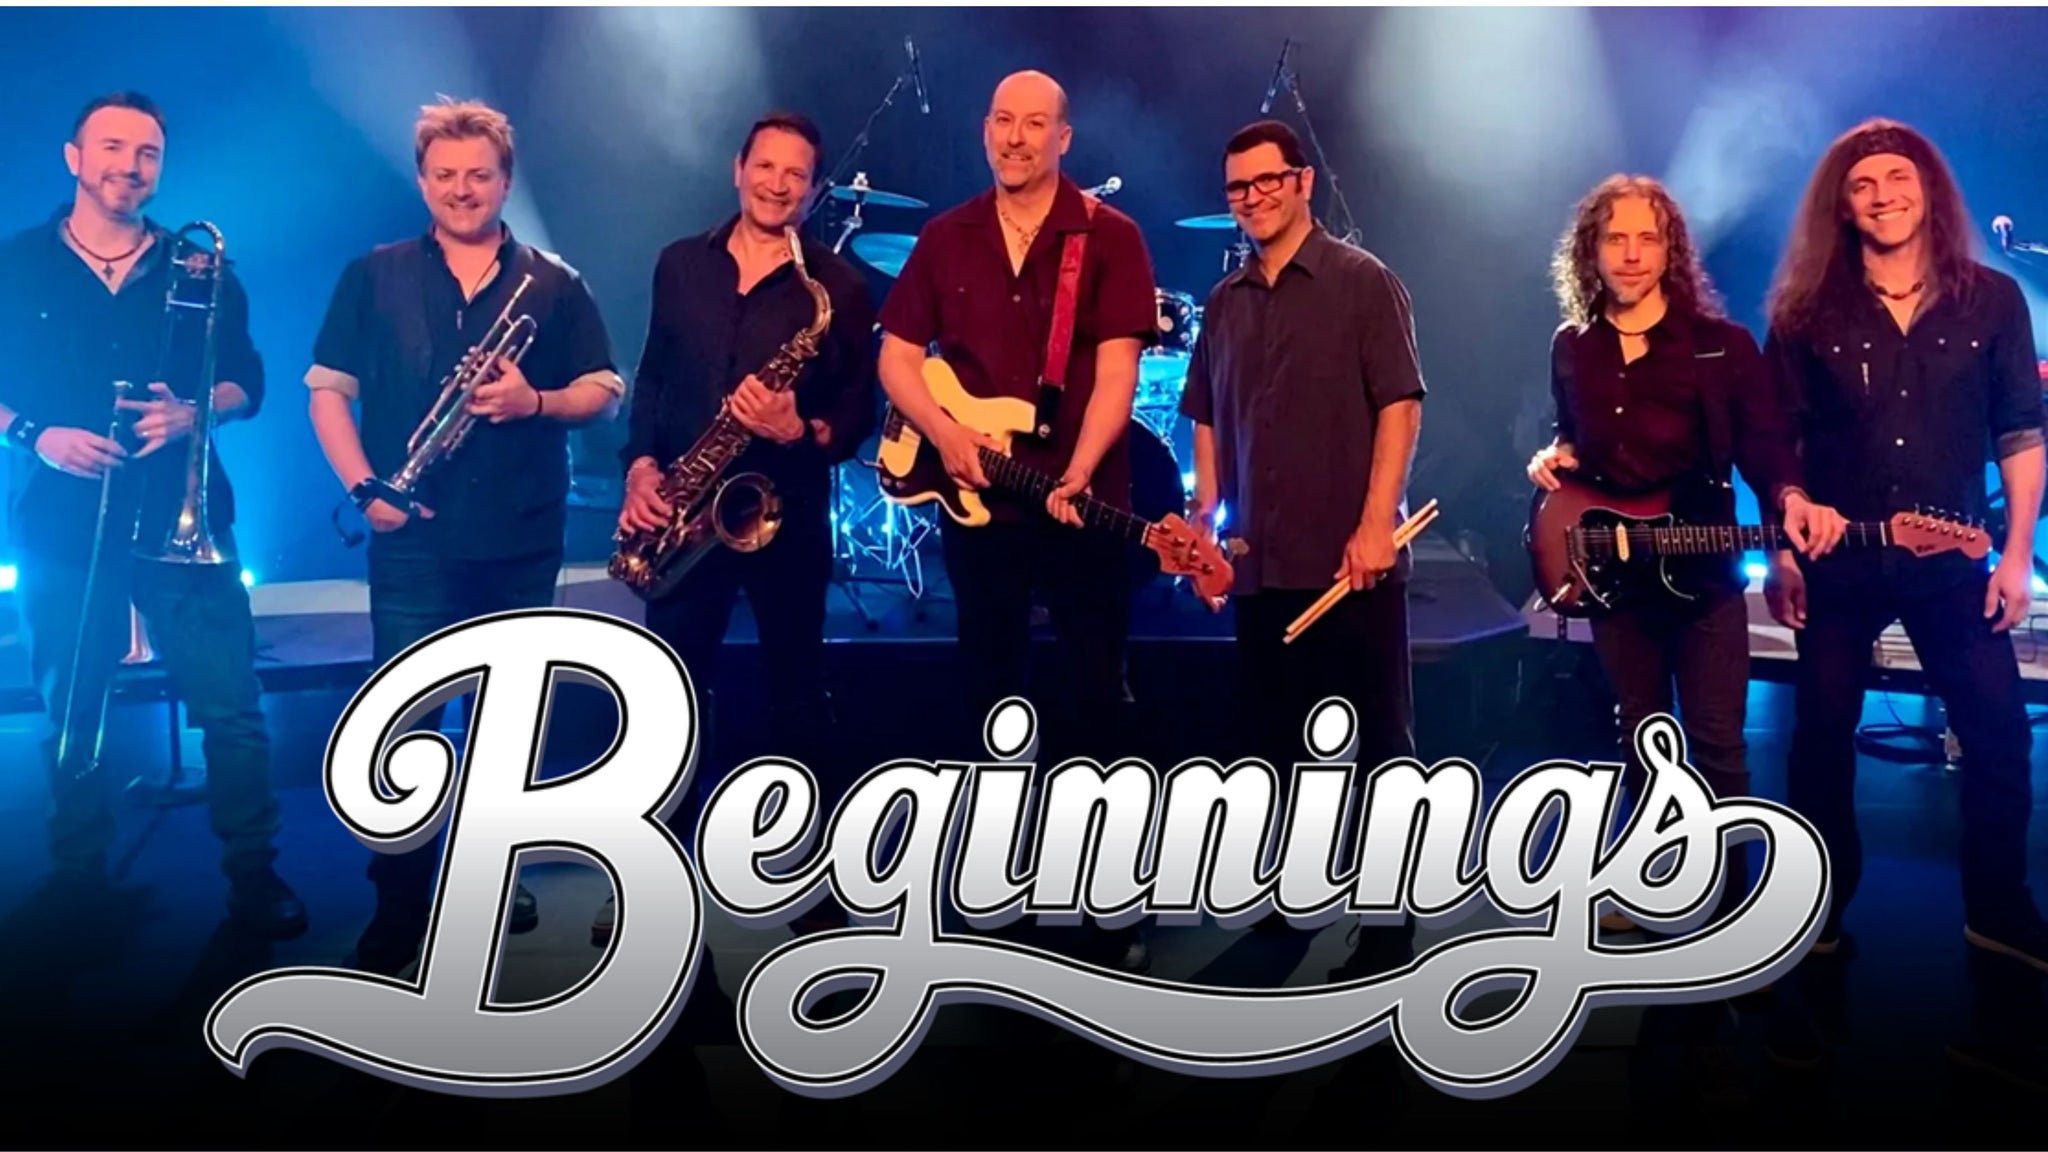 Beginnings: A Celebration Of The Music Of Chicago pre-sale password for show tickets in Hagerstown, MD (The Maryland Theatre)